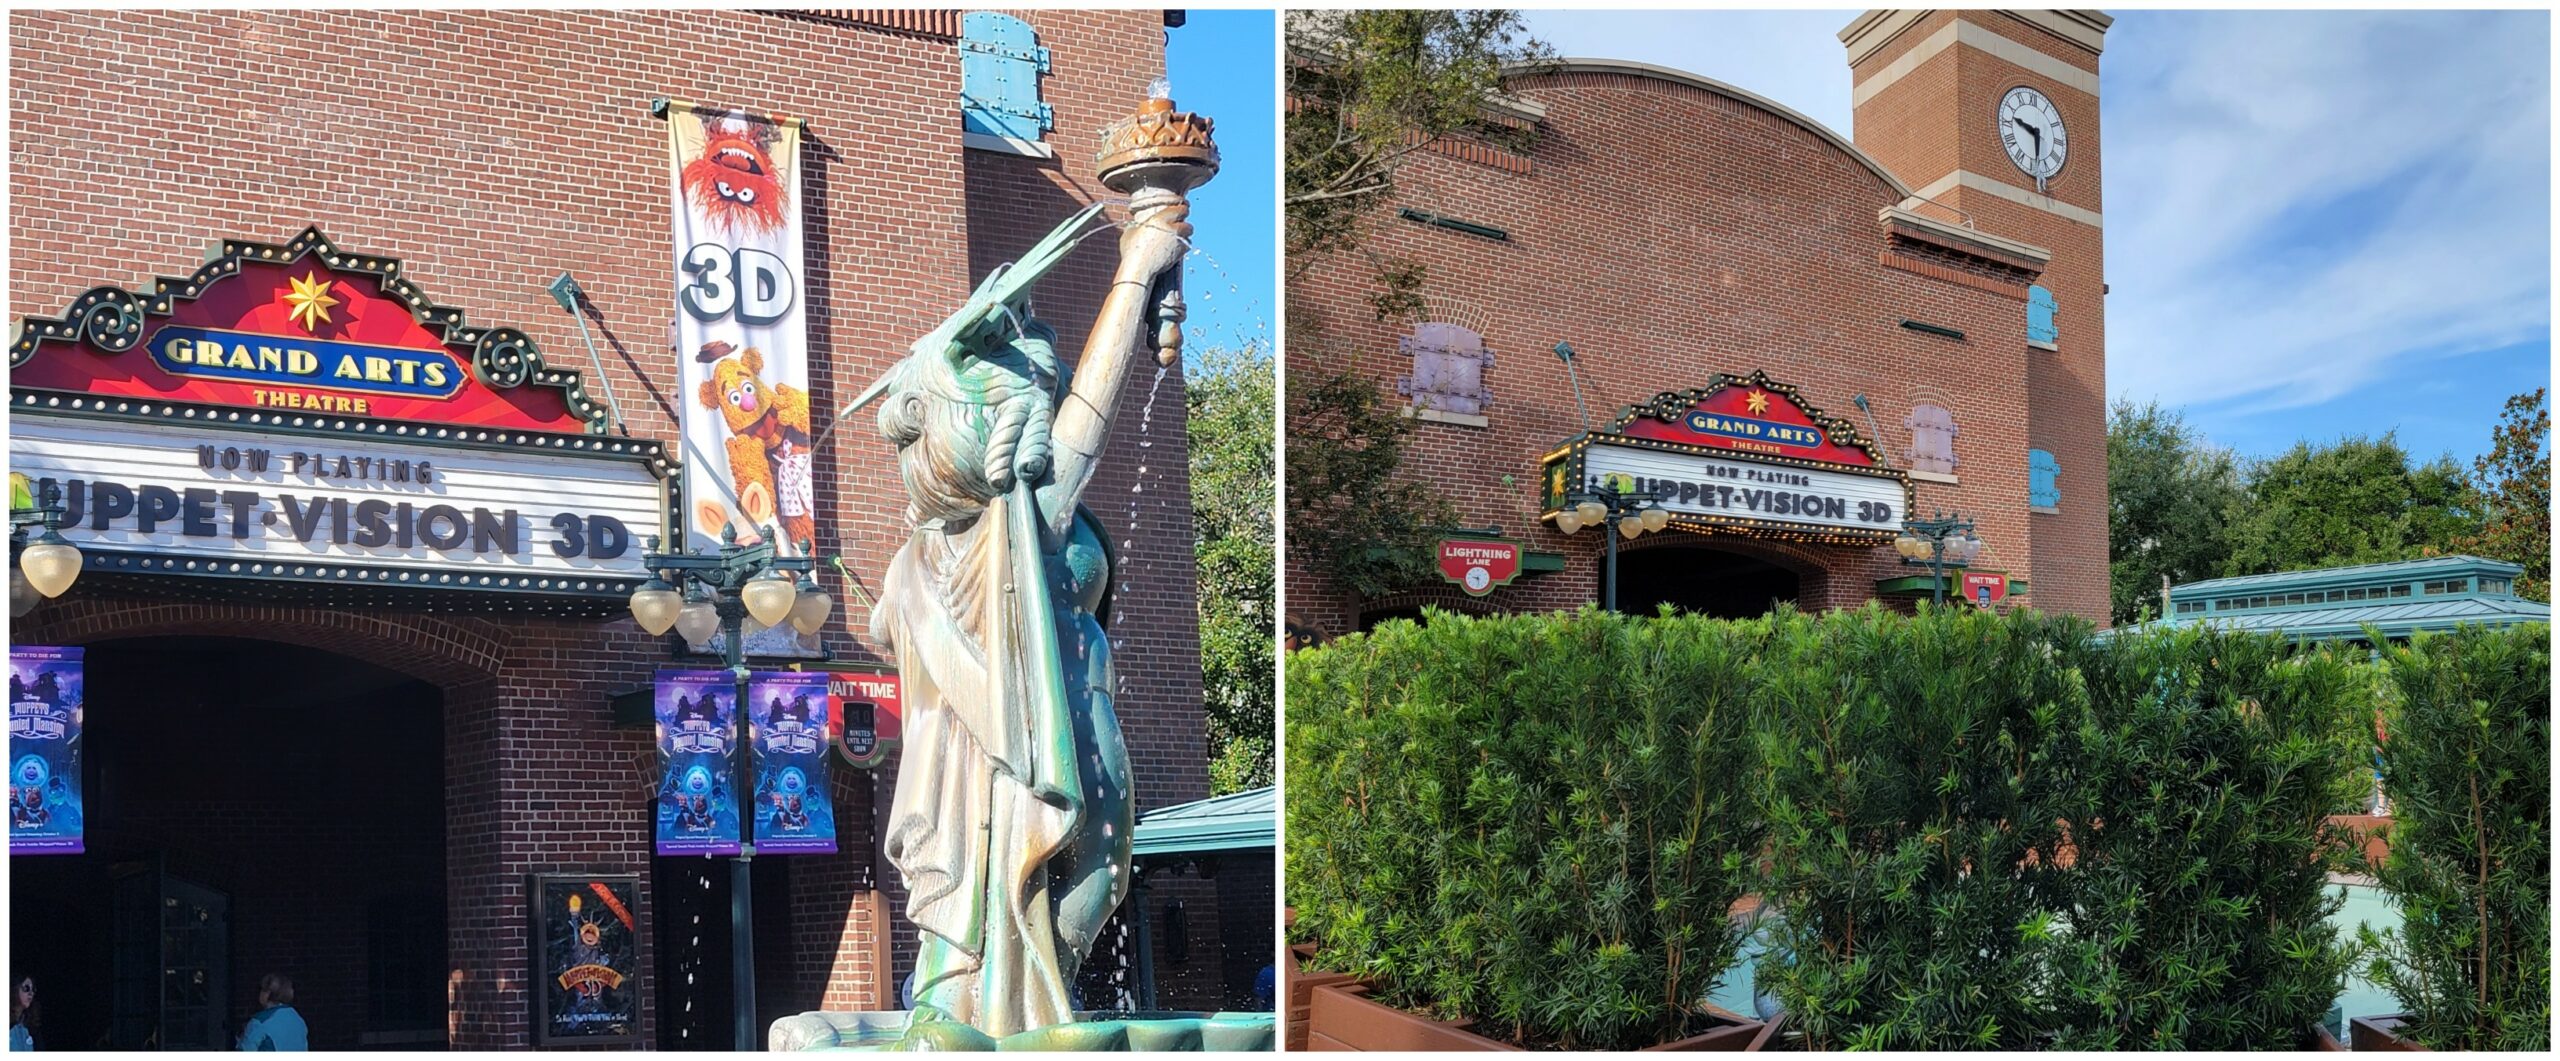 Ms. Piggy Statue Vanishes from the Front of Muppets Vision 3D (Do You Like My Clickbait Title?)